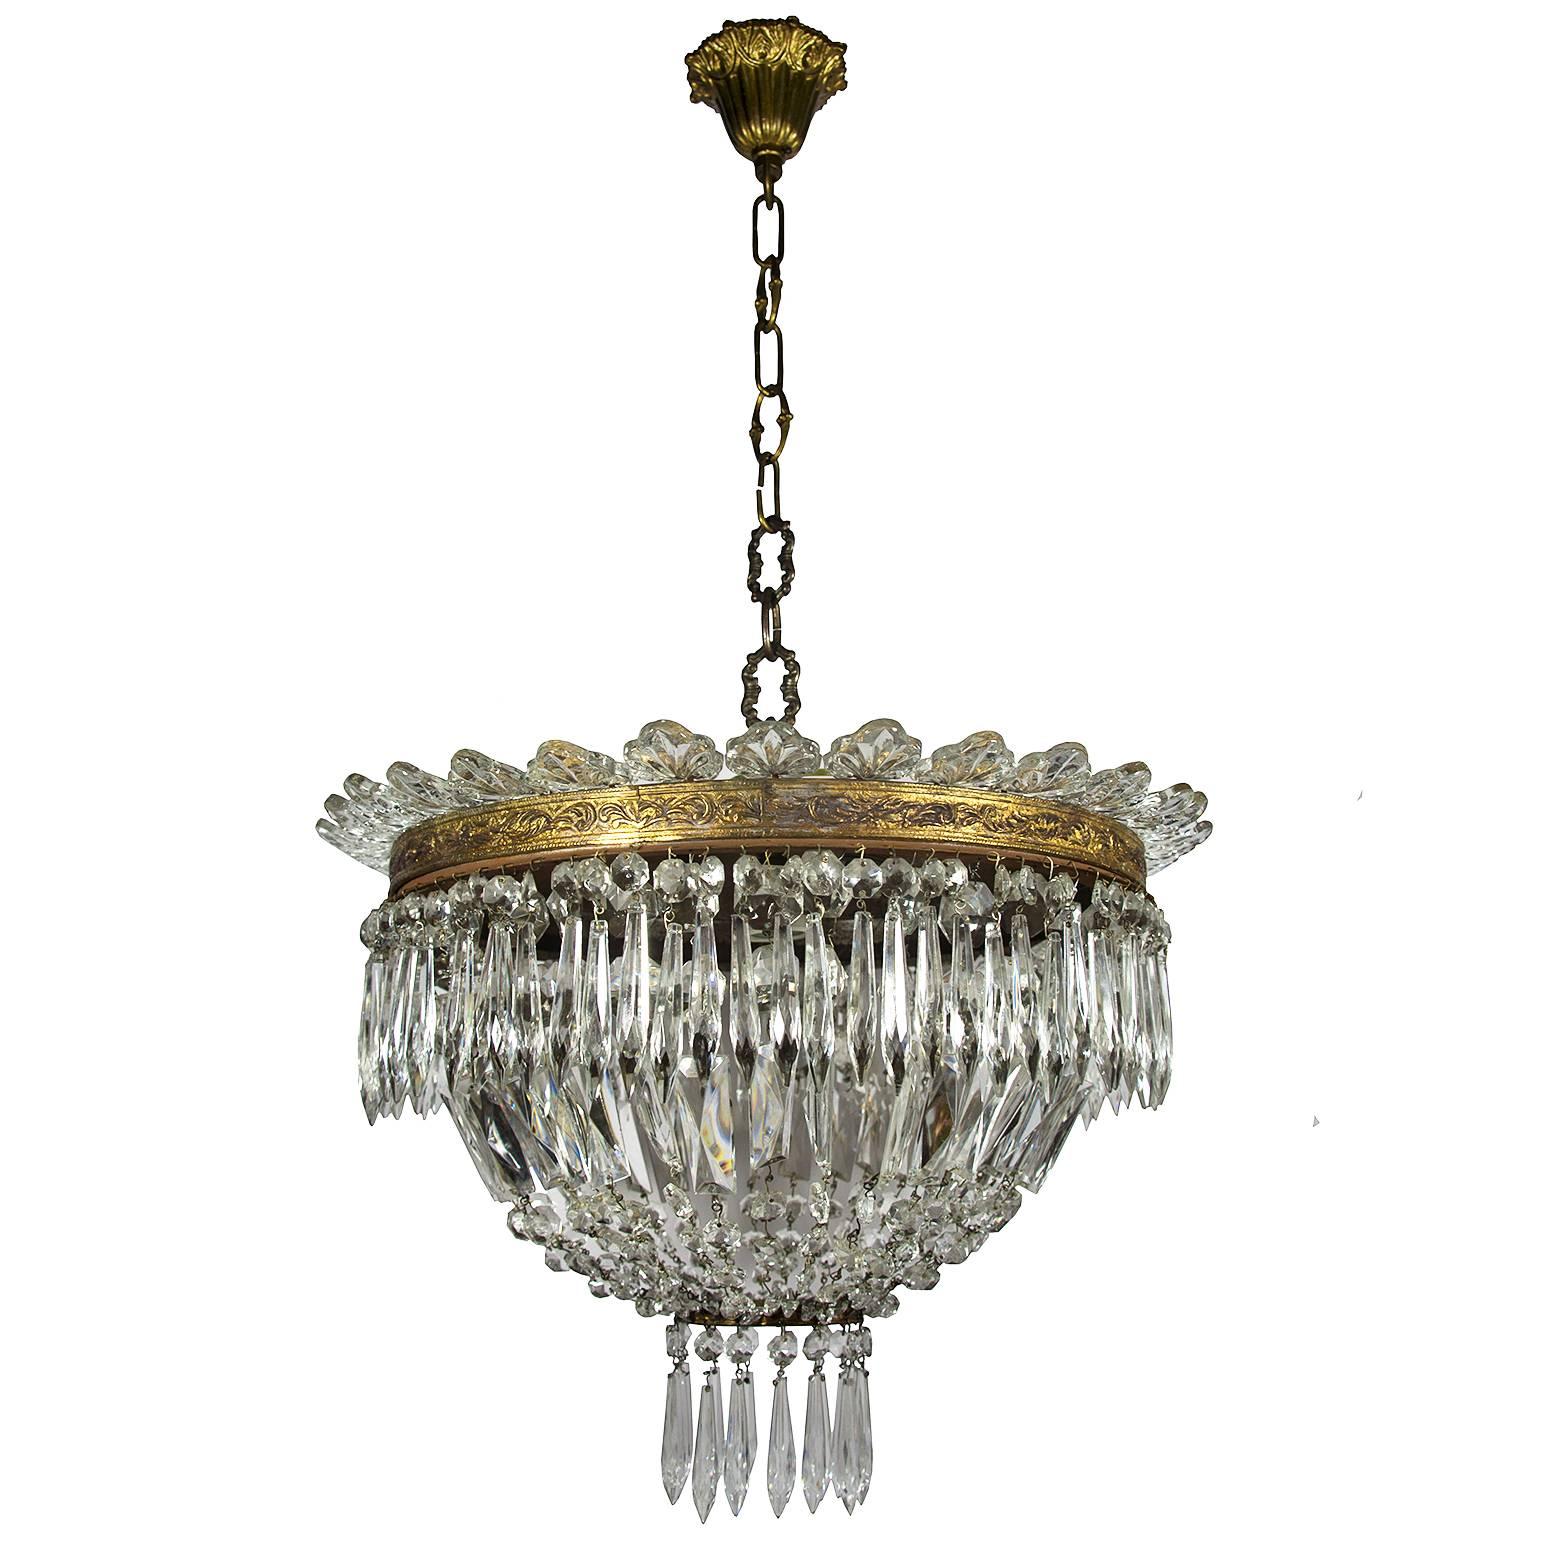 Stunning antique Empire style Italian crystal chandelier with Venetian Murano Leaves
Very good vintage condition (please see photos)
Rewired, you must use professional electrician service to set it up. Three-light bulb sockets
Acquired in Italy,